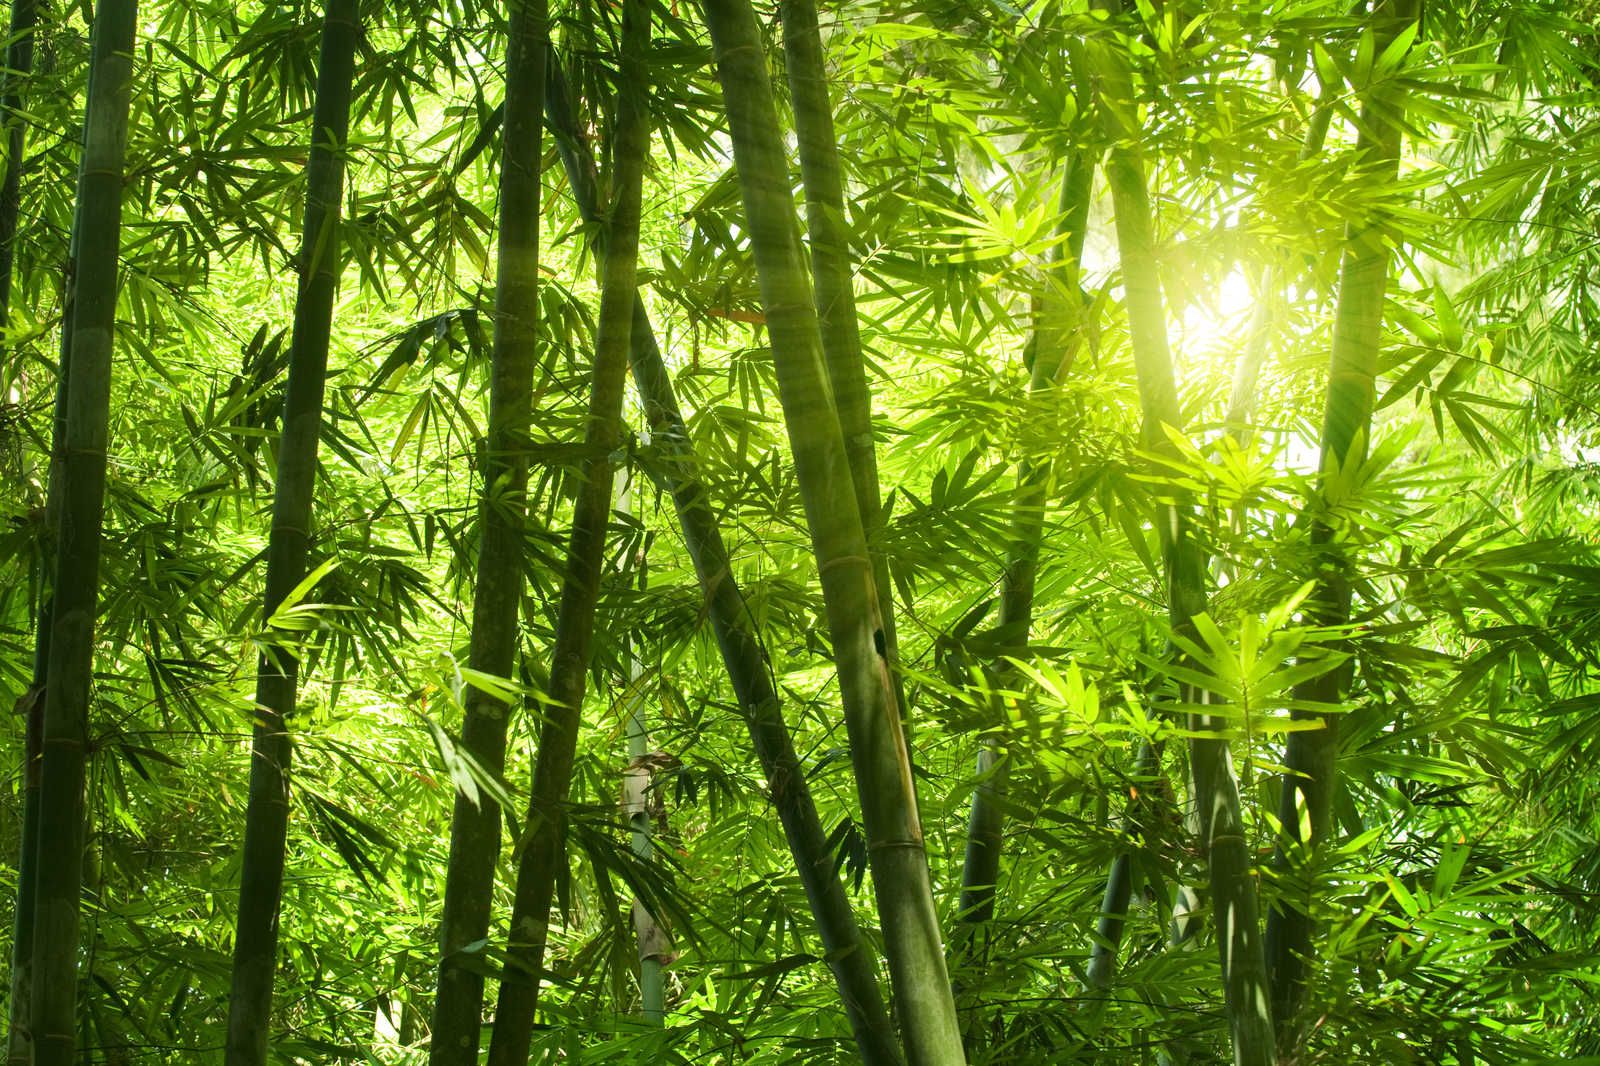             Canvas painting Bamboo and Leaves - 0,90 m x 0,60 m
        